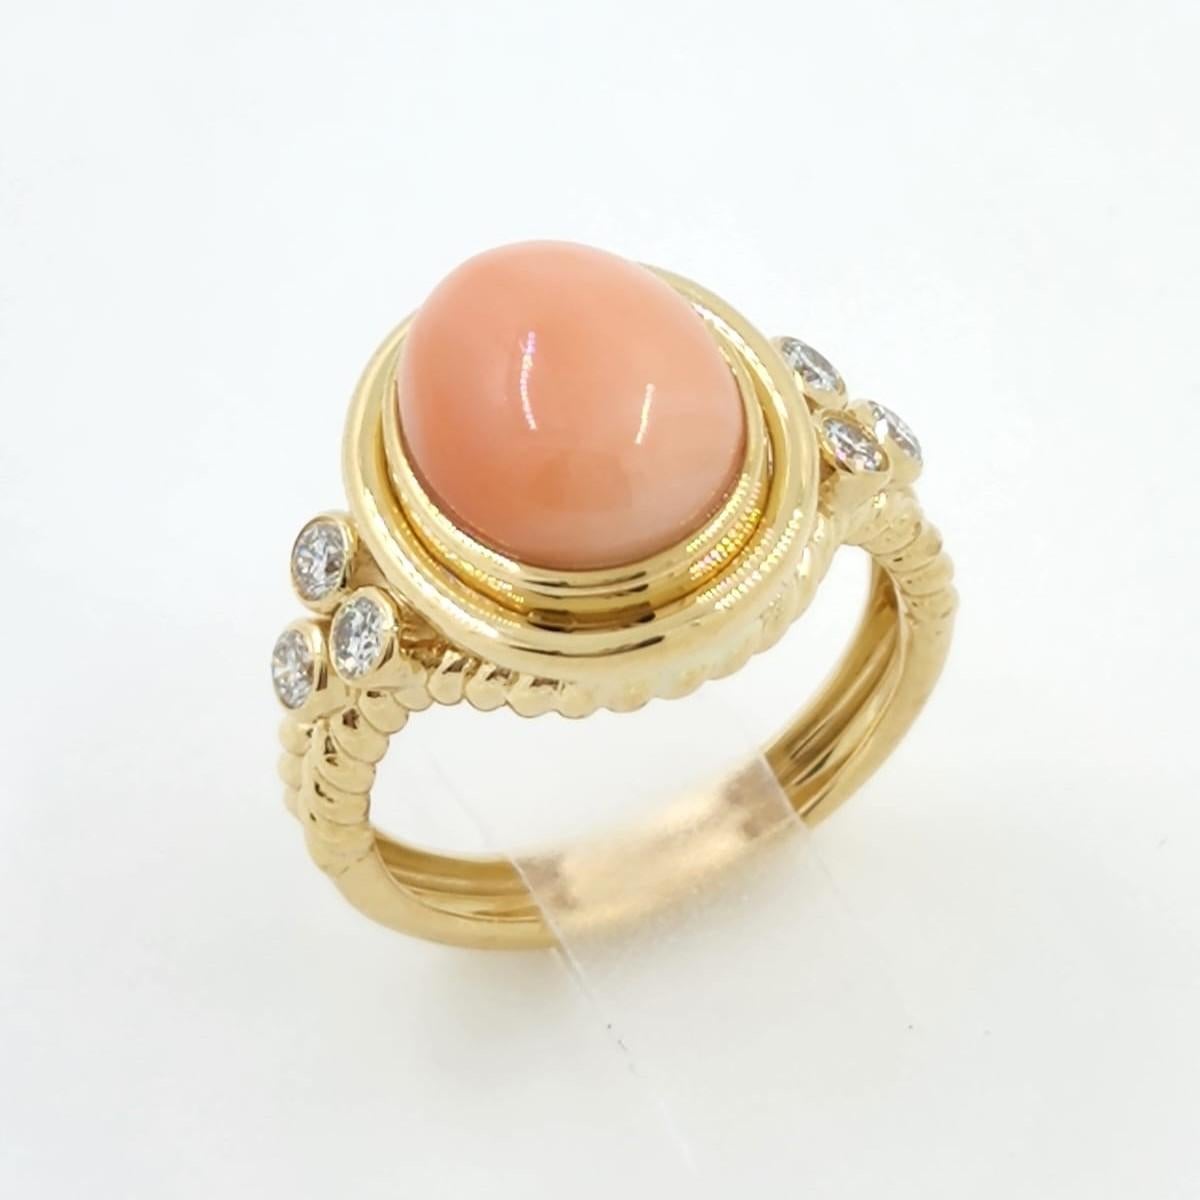 Oval Cut Coral with Diamonds Ring in 18K Yellow Gold